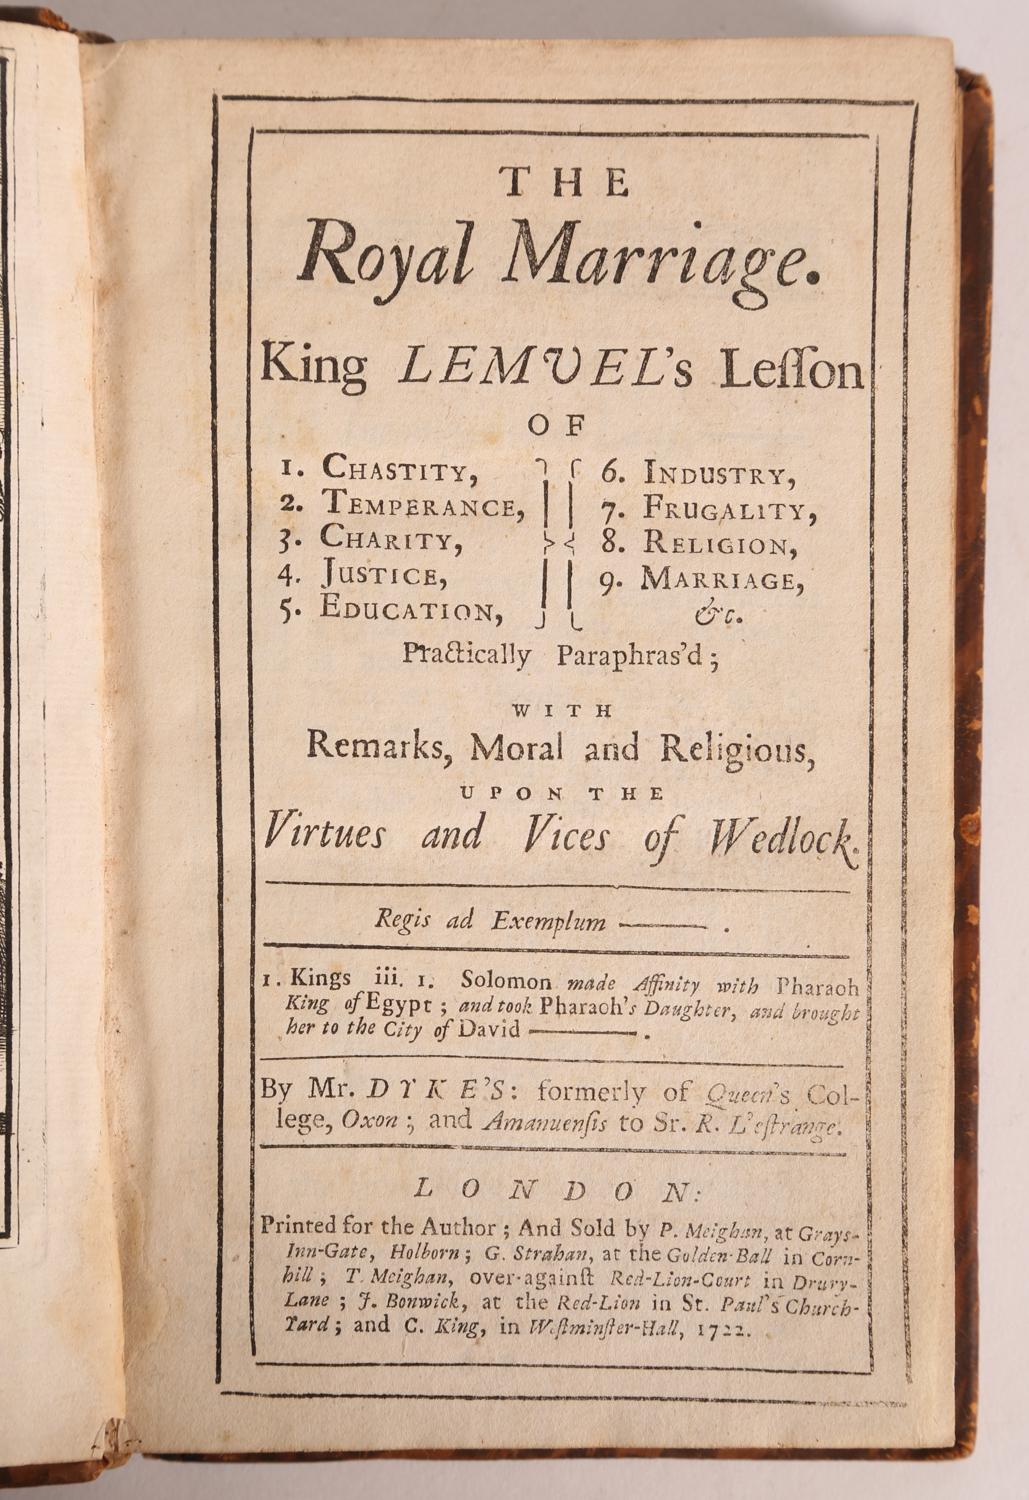 The Royal Marriage, King Lemuel’s Lesson